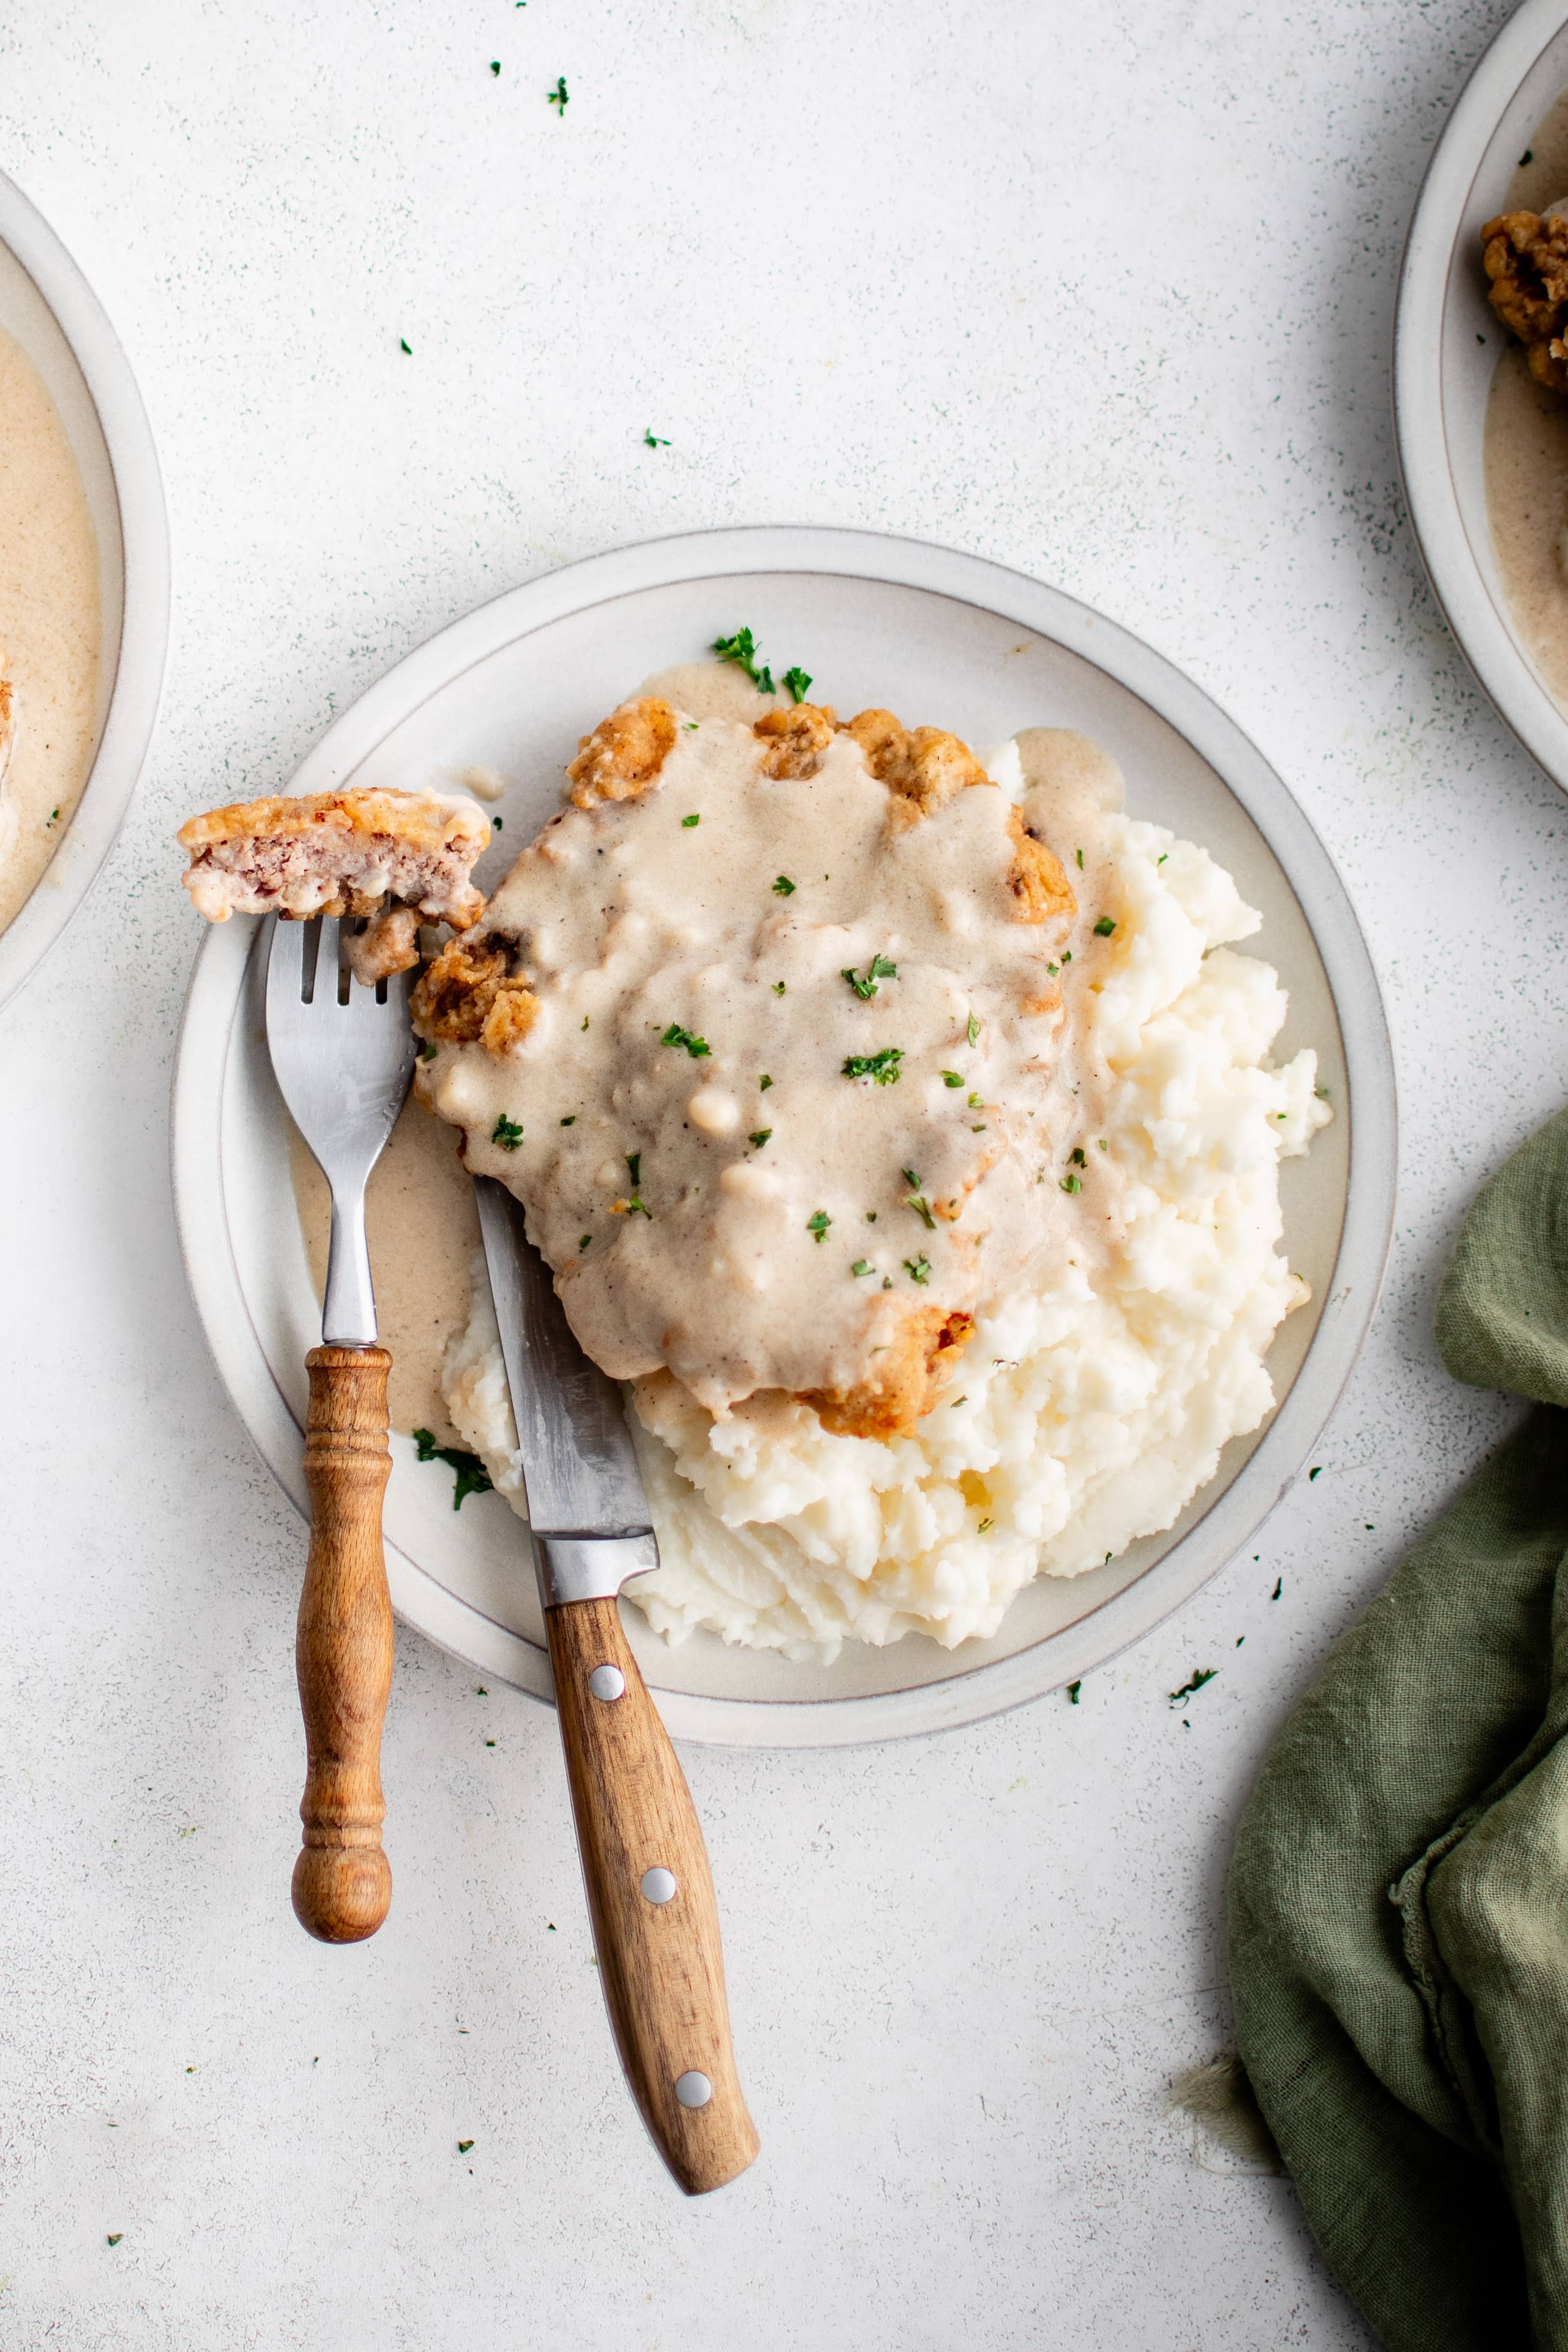 Two pieces of golden brown and crispy chicken fried steak smothered in creamy white gravy served over fluffy mashed potatoes.